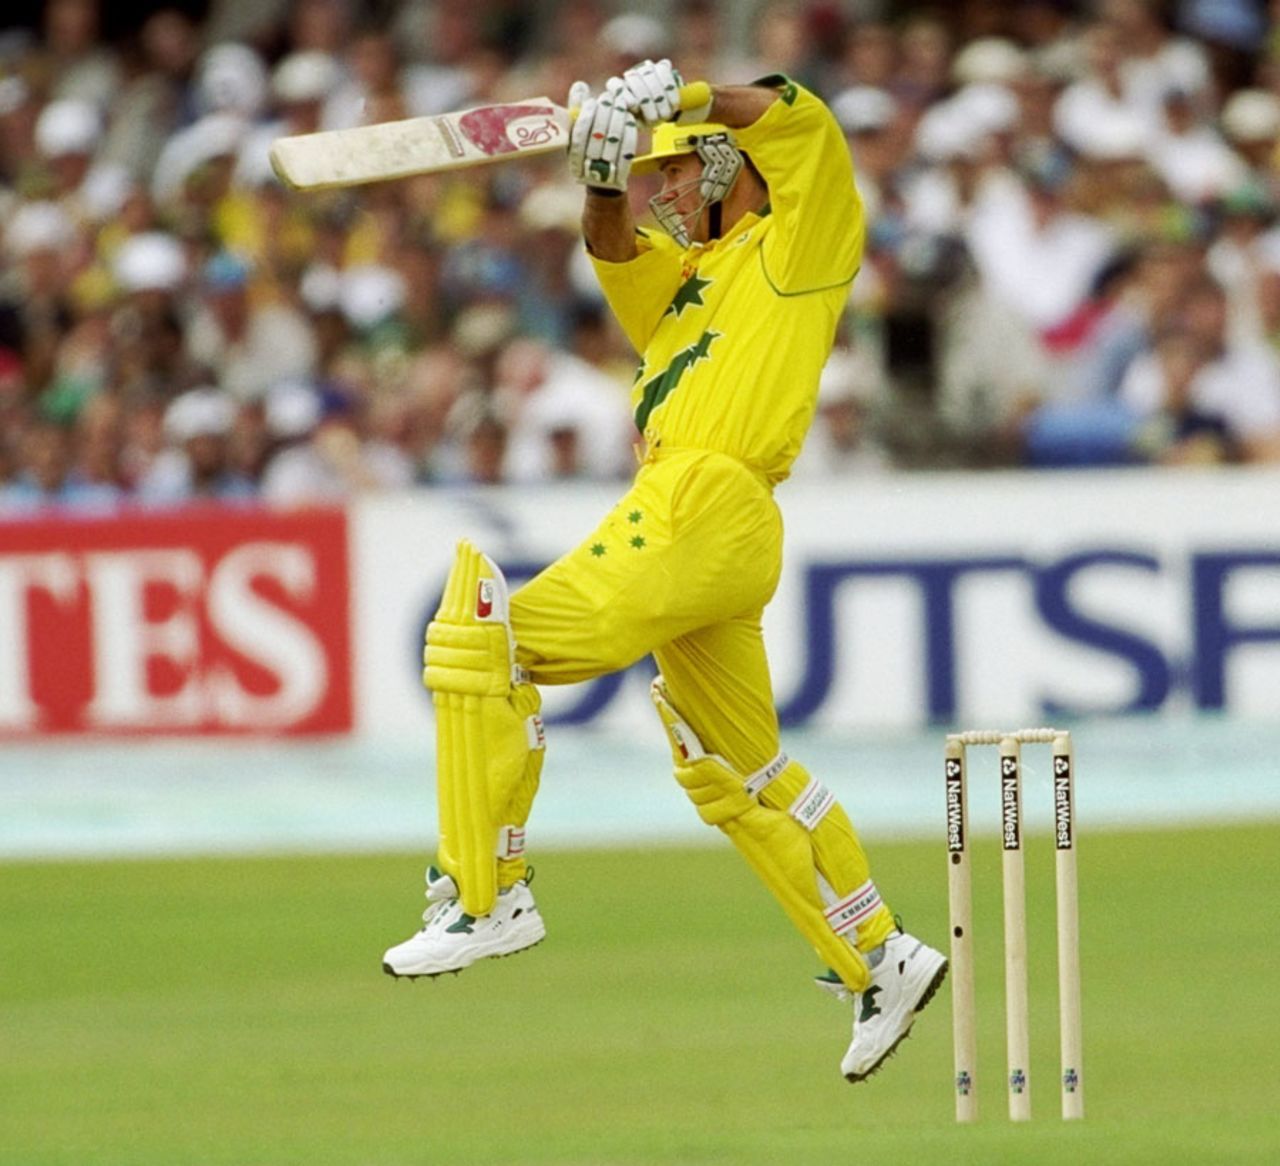 Ricky Ponting bats during his innings of 69, Australia v South Africa, Super Sixes, Headingley, June 13, 1999